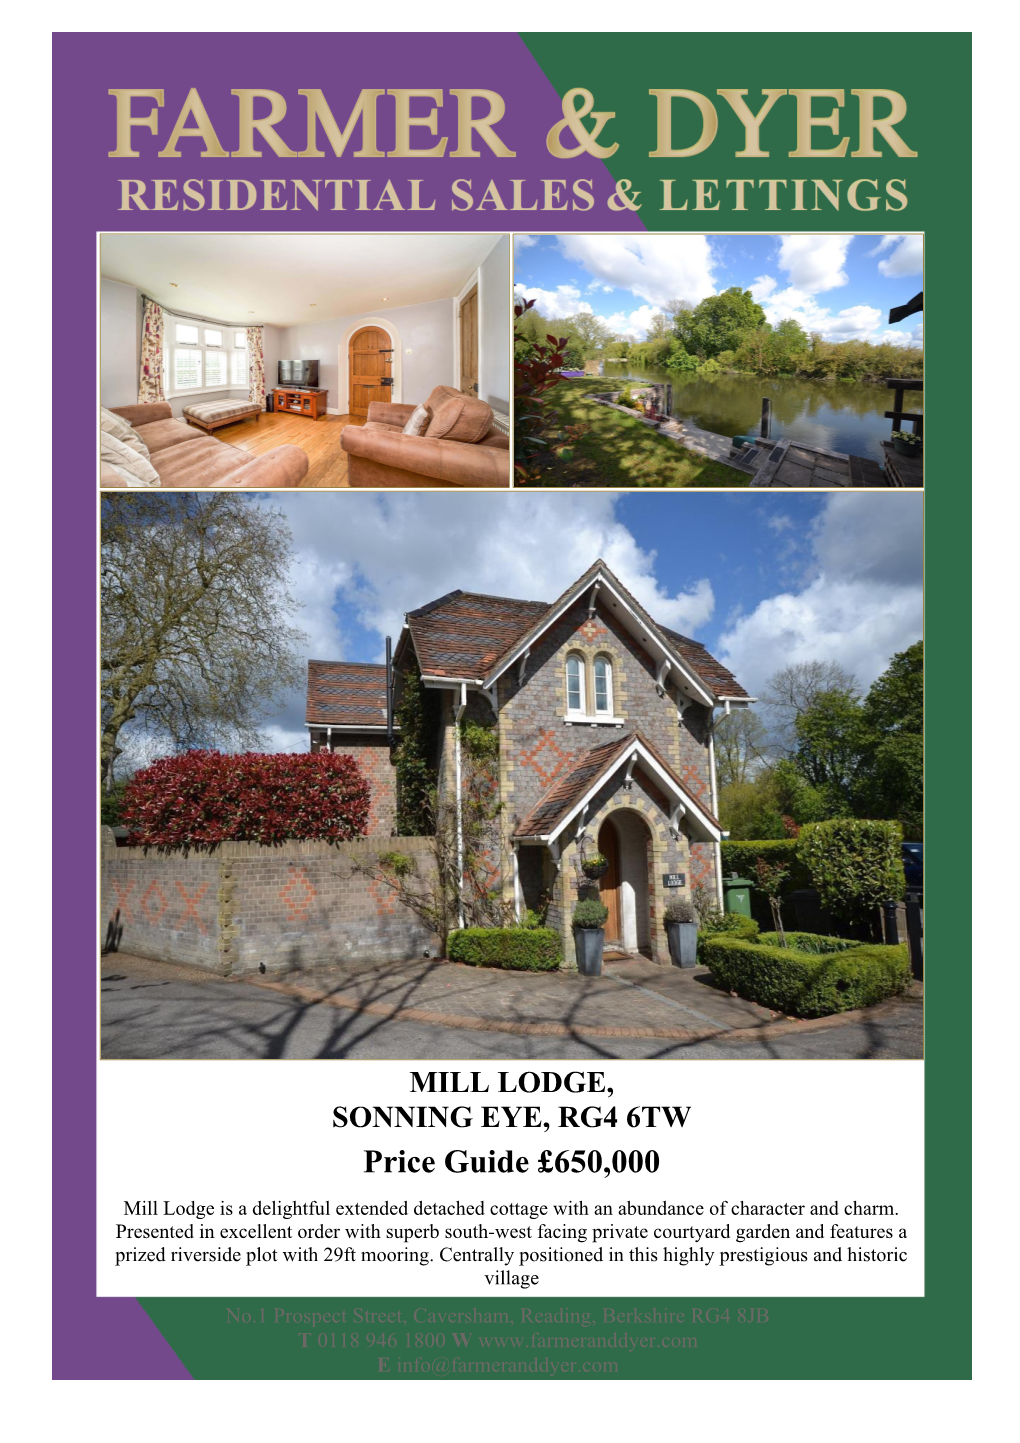 Price Guide £650,000 Mill Lodge Is a Delightful Extended Detached Cottage with an Abundance of Character and Charm